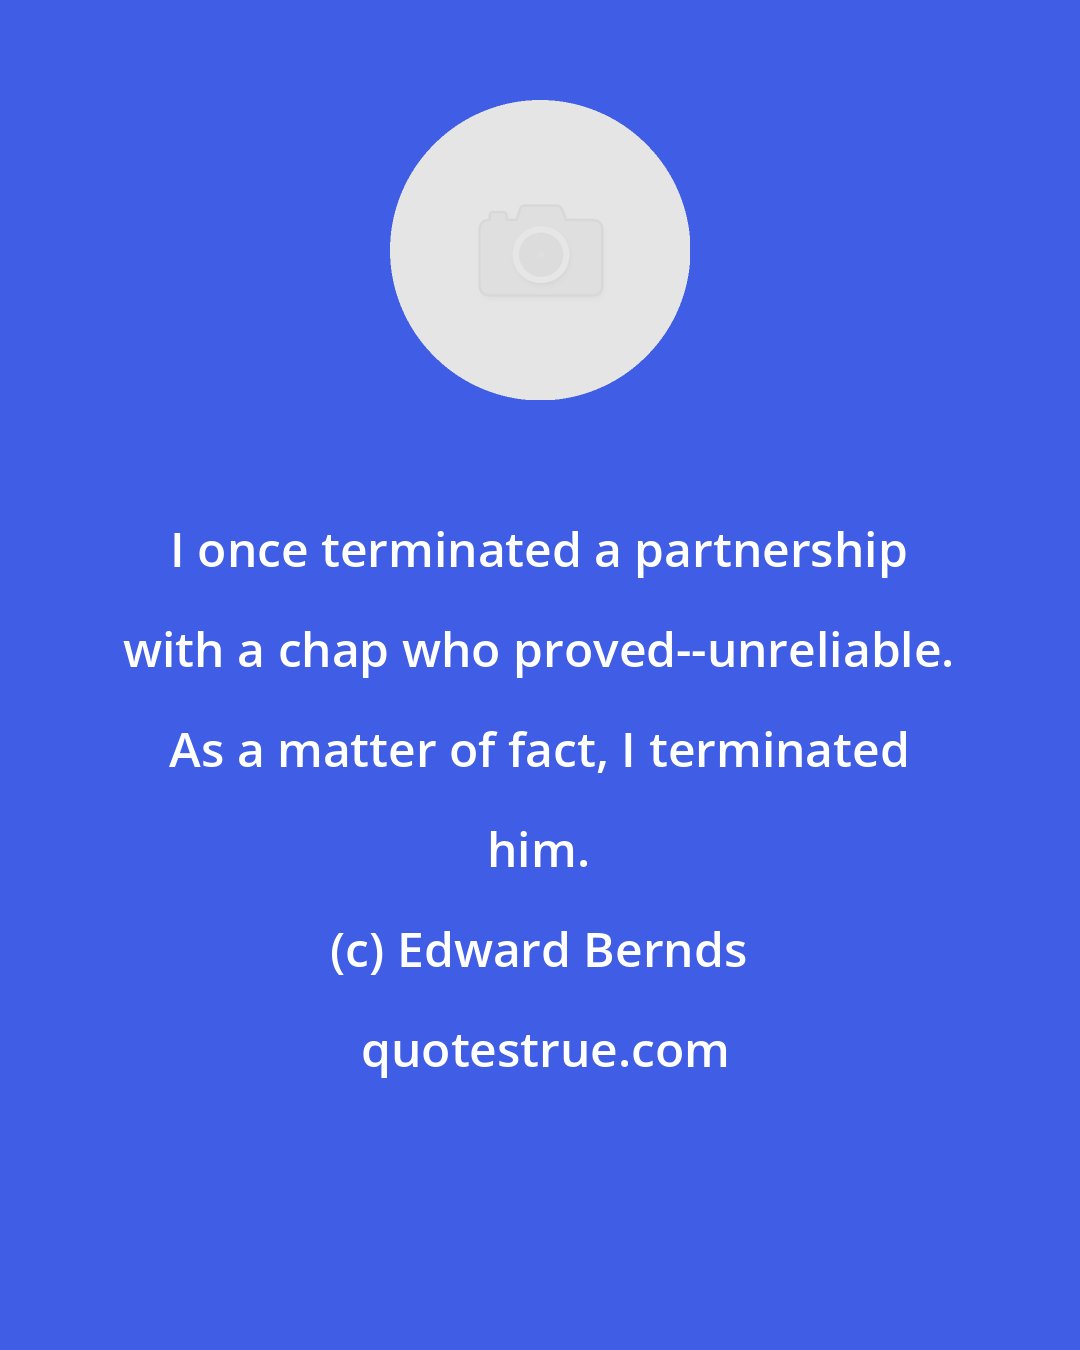 Edward Bernds: I once terminated a partnership with a chap who proved--unreliable. As a matter of fact, I terminated him.